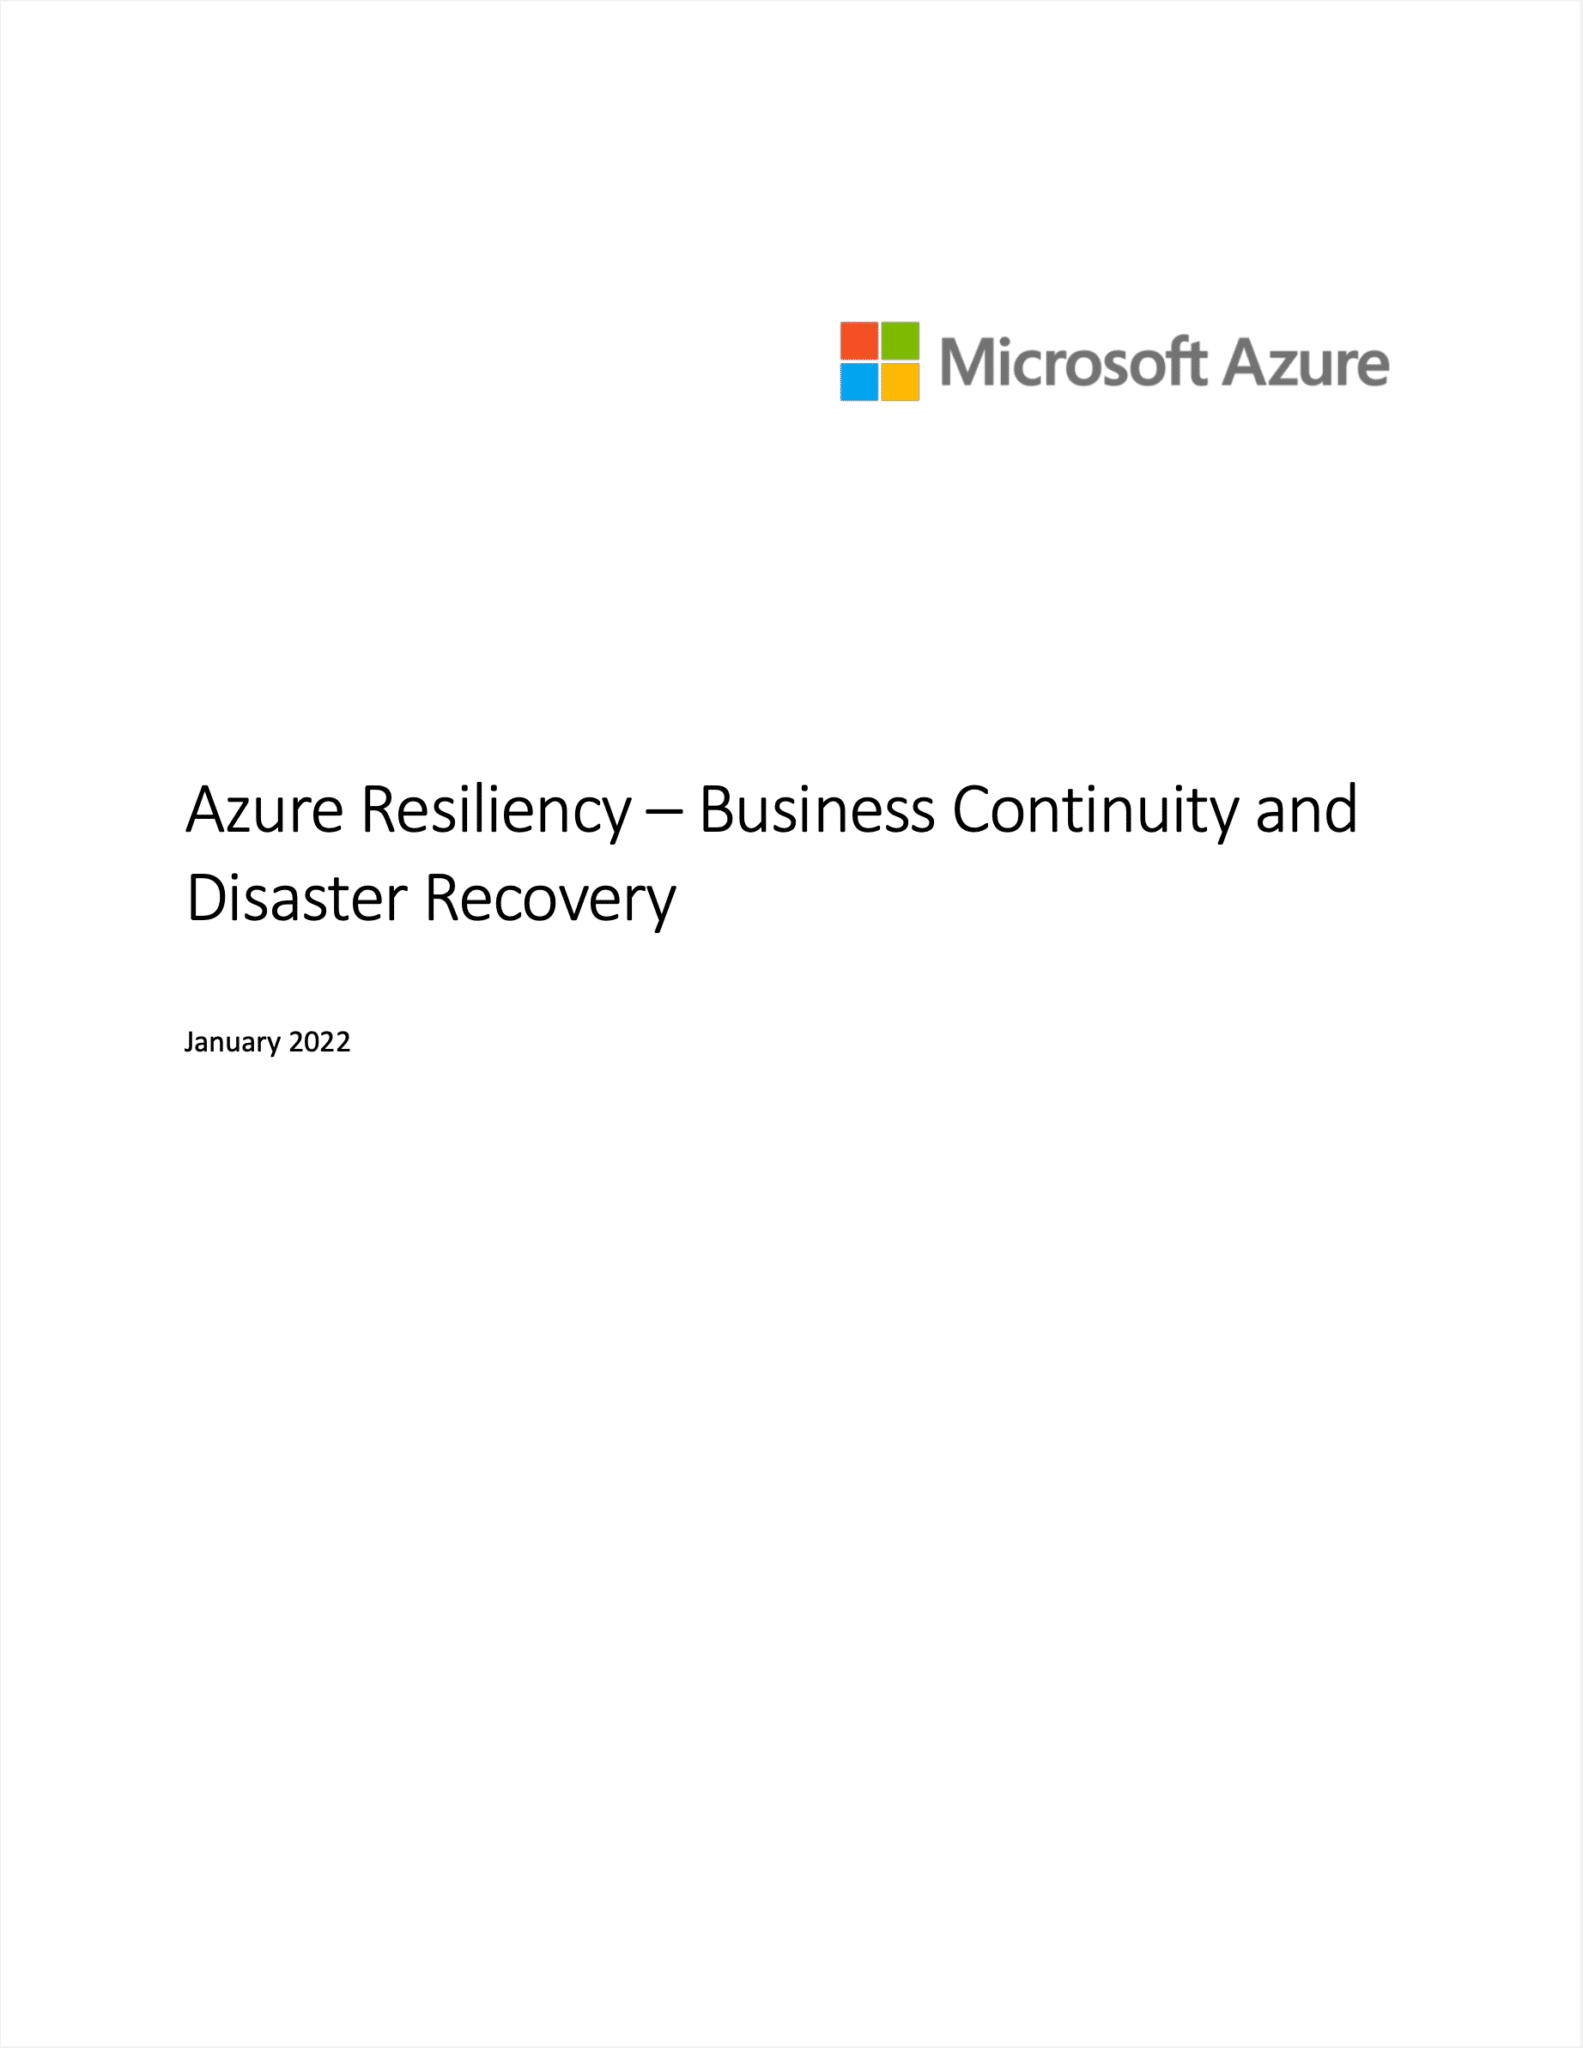 Azure Resiliency – Business Continuity and Disaster Recovery 5